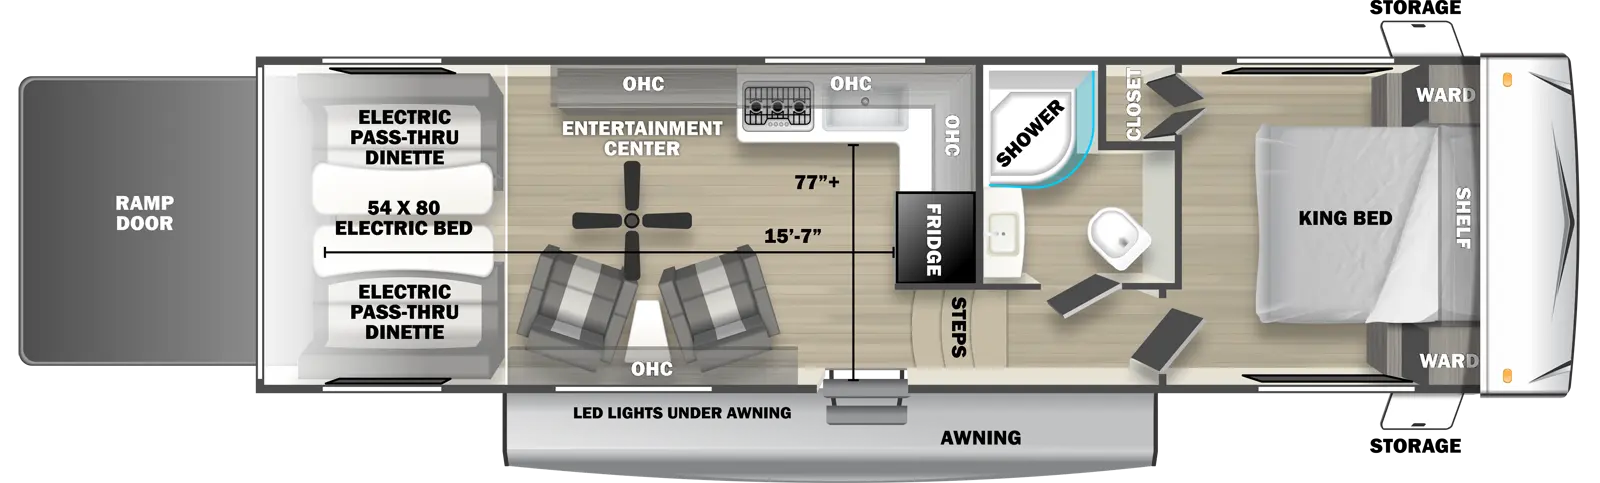 The 2710SRX fifth wheel has no slide outs, 1 entry door and 1 rear ramp door. Exterior features include an awning with LED lights and front opposing side storage access. Interior layout from front to back includes front bedroom with foot-facing King bed, shelf over the bed, front corner wardrobes and front facing closet; off-door side bathroom with radius shower, toilet and single sink vanity; 3 steps down into the kitchen area with off-door side L-shaped countertop, stovetop, L-Shaped overhead cabinets, sink and rear facing refrigerator; 2 door side recliners with end table; ceiling fan; off-door side entertainment center with overhead cabinet; and rear 54 x 80 electric bed over electric pass-through dinette. Cargo length from rear of unit to refrigerator is 15 ft. 7 in. Cargo width from countertop to door side wall is 77 inches.